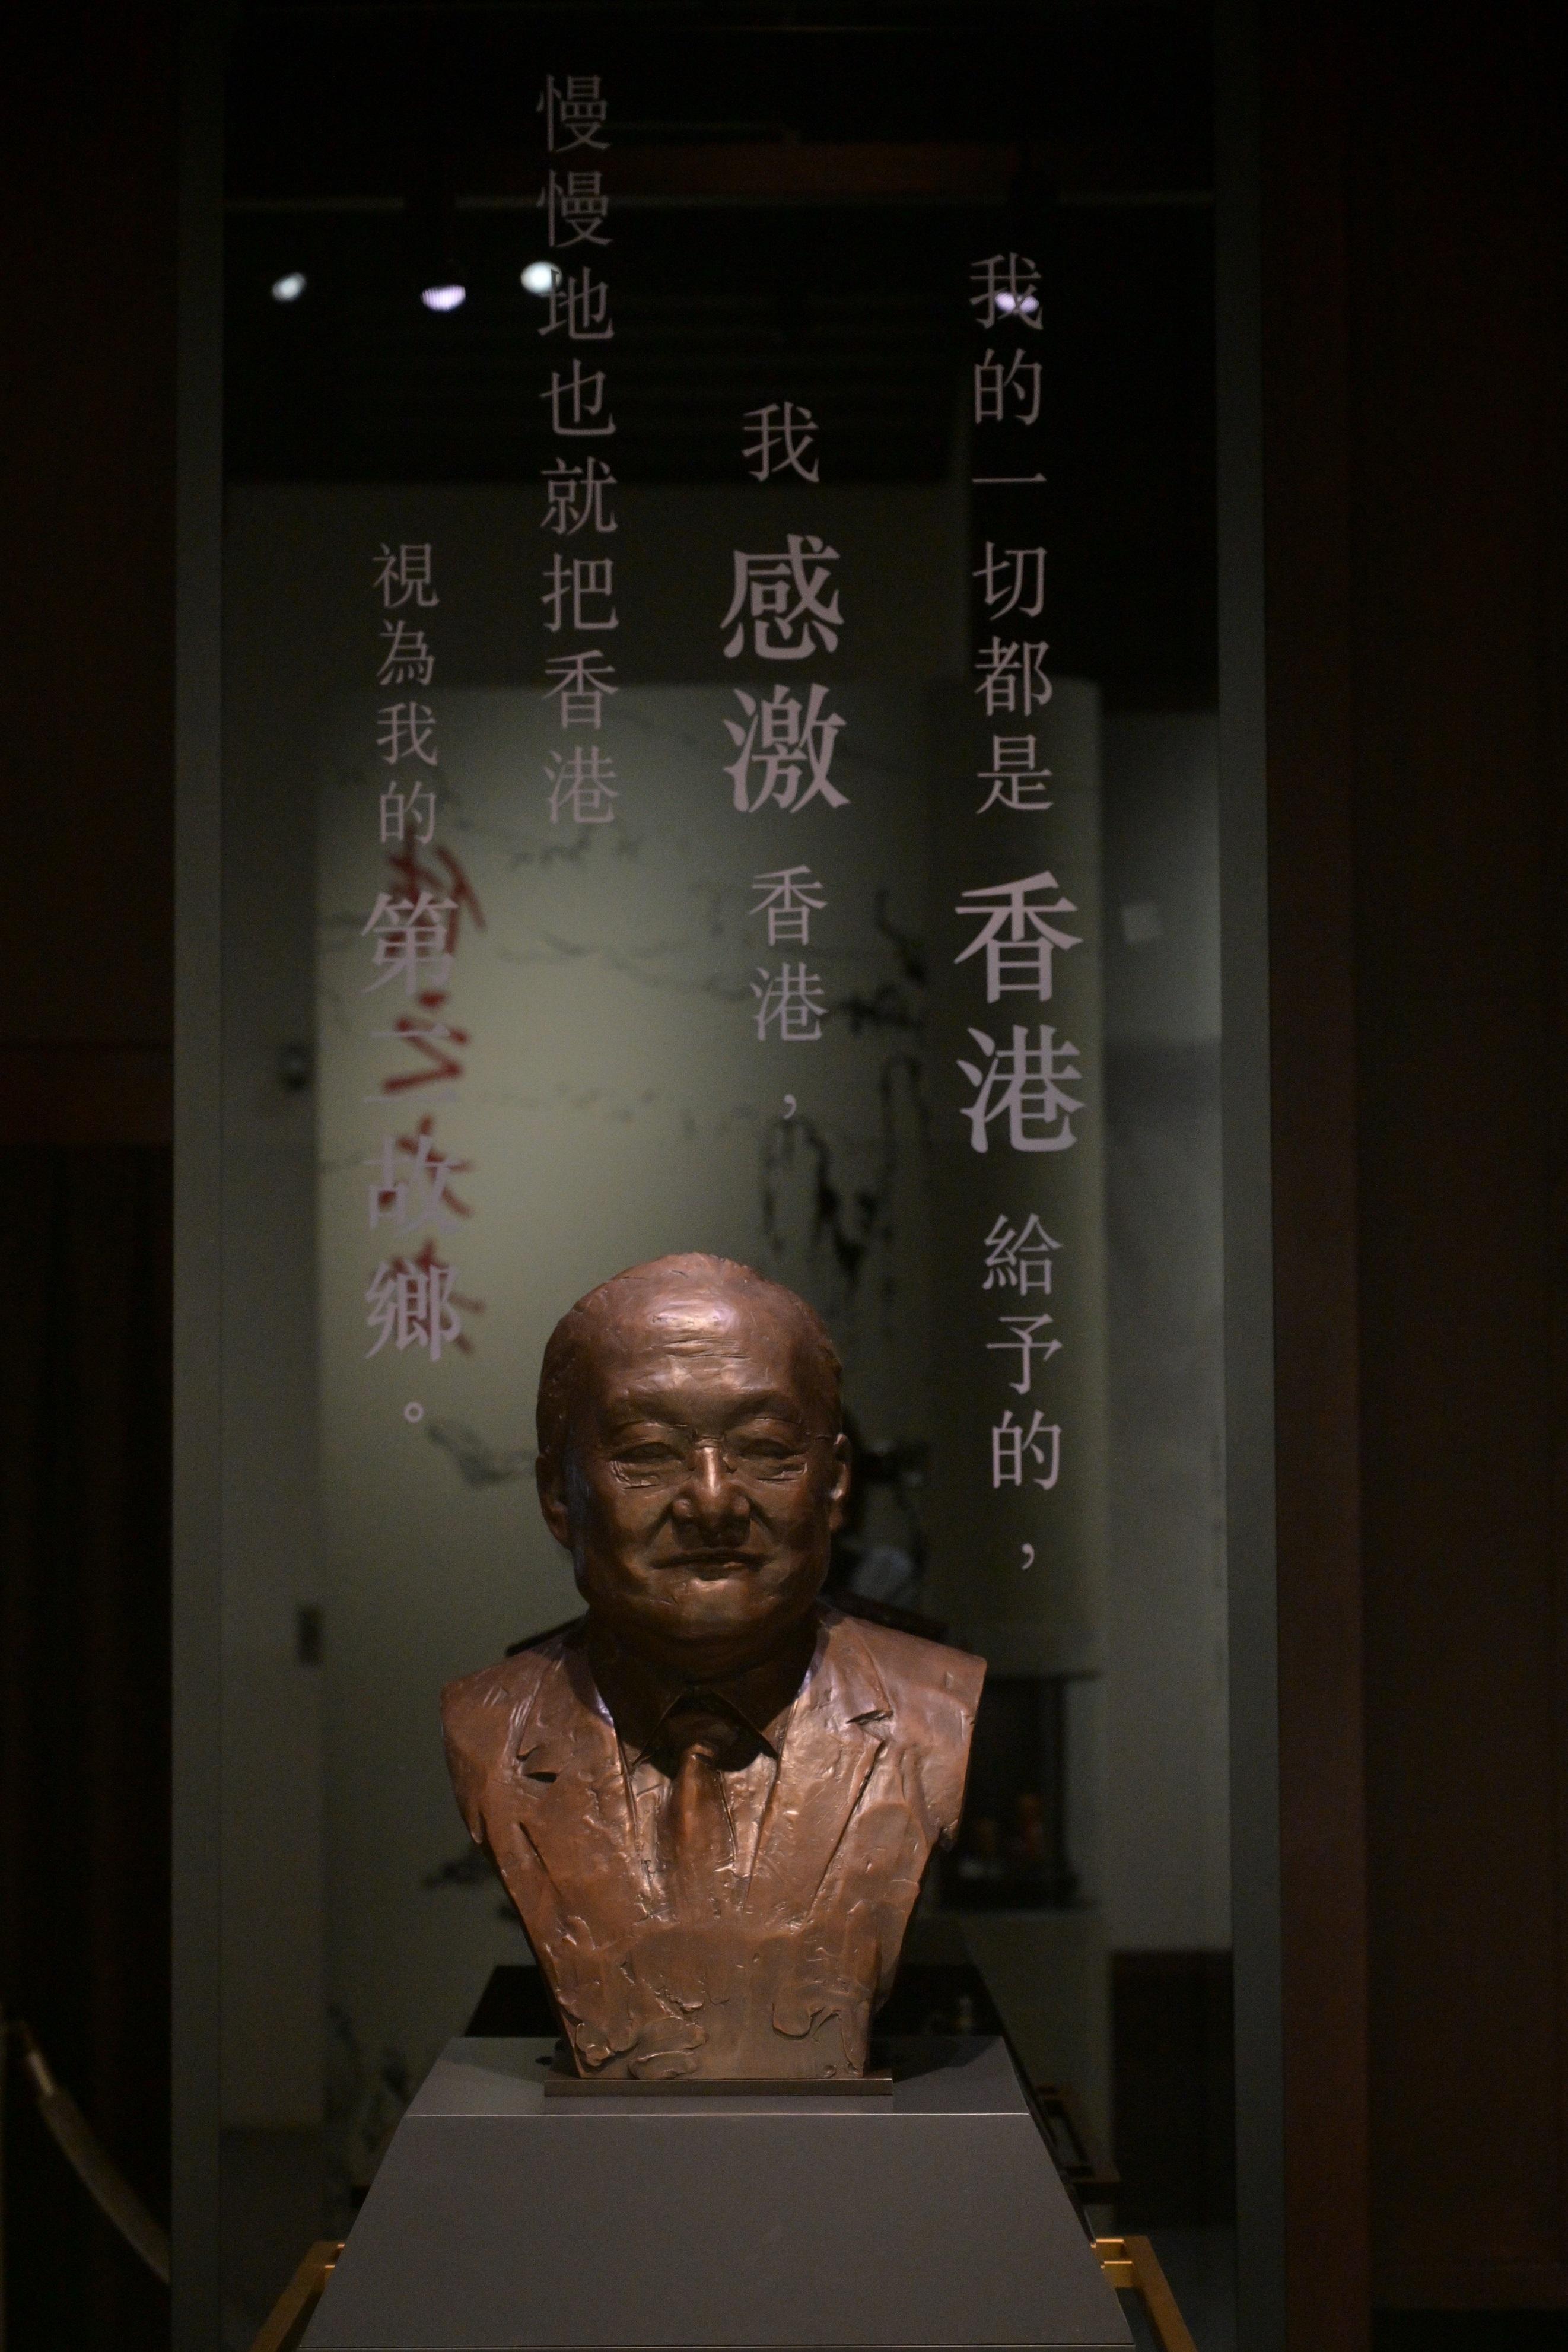 To commemorate the 100th anniversary of the birth of Dr Louis Cha (Jin Yong), the Hong Kong Heritage Museum (HKHM) will present the exhibition "A Path to Glory - Jin Yong's Centennial Memorial, Sculpted by Ren Zhe" from tomorrow (March 16). Picture shows the bust of Dr Cha displayed at the permanent exhibition of the Jin Yong Gallery.

